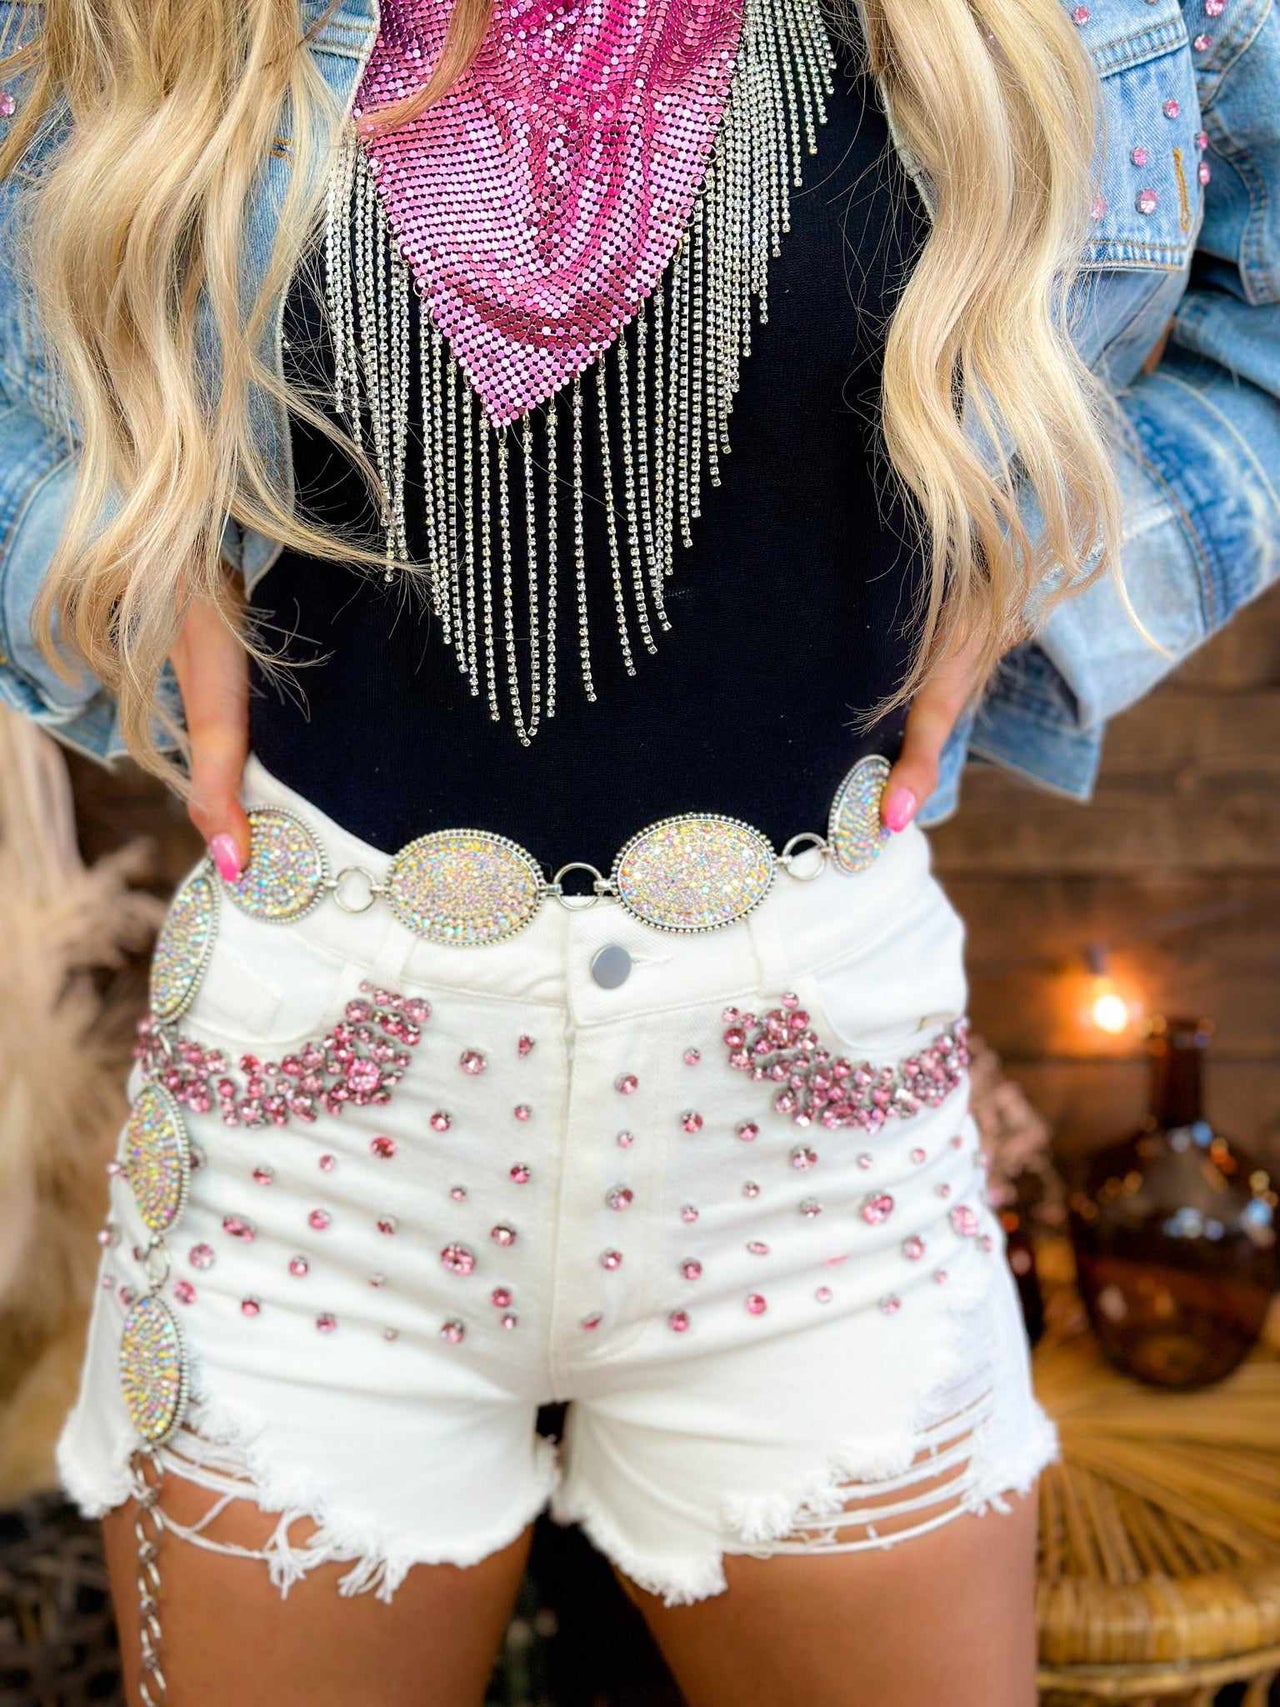 Distressed white jean shorts with pink gem studs.